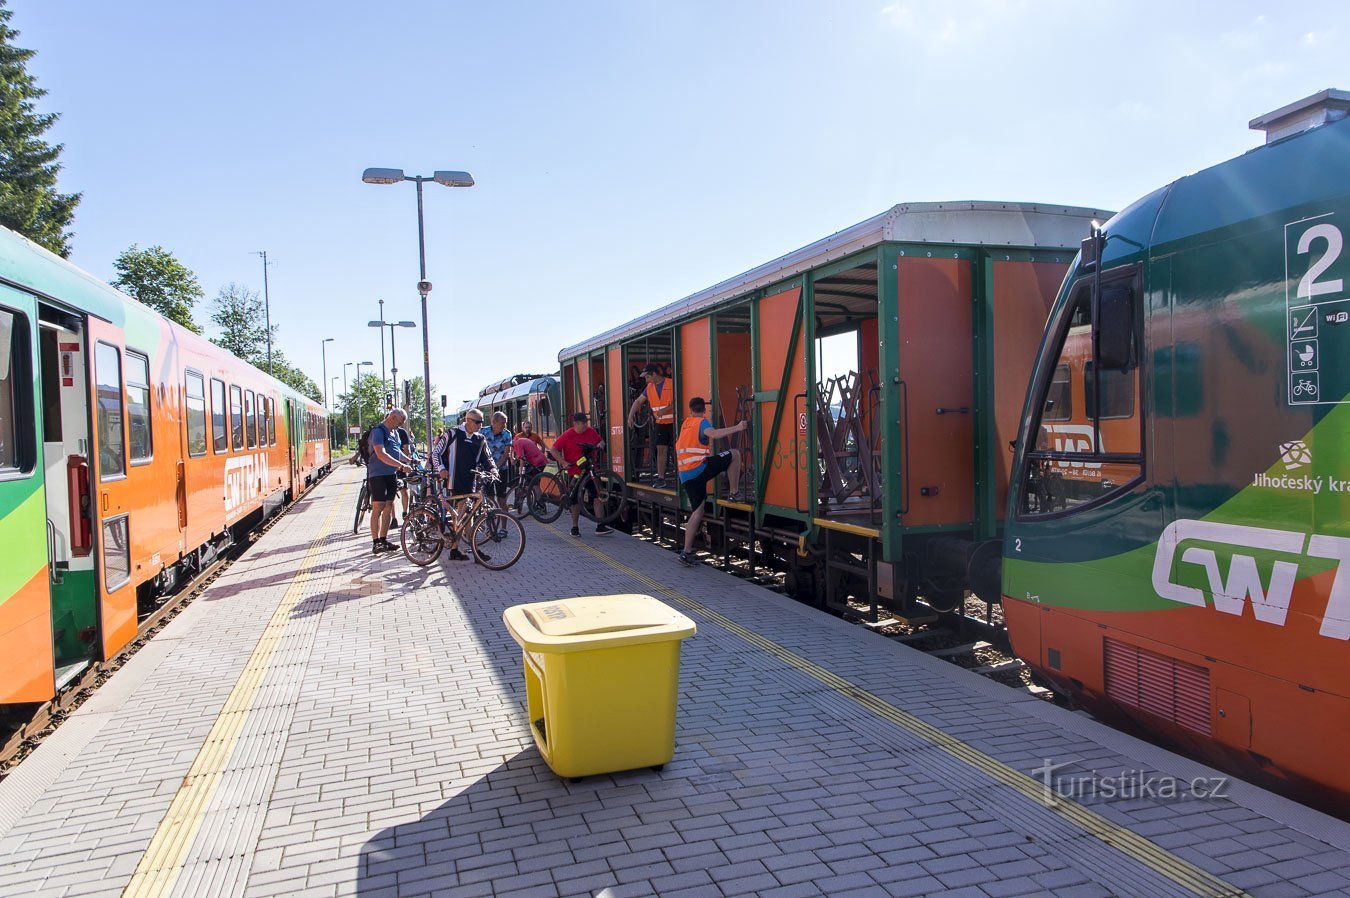 this is what a cycle train looks like